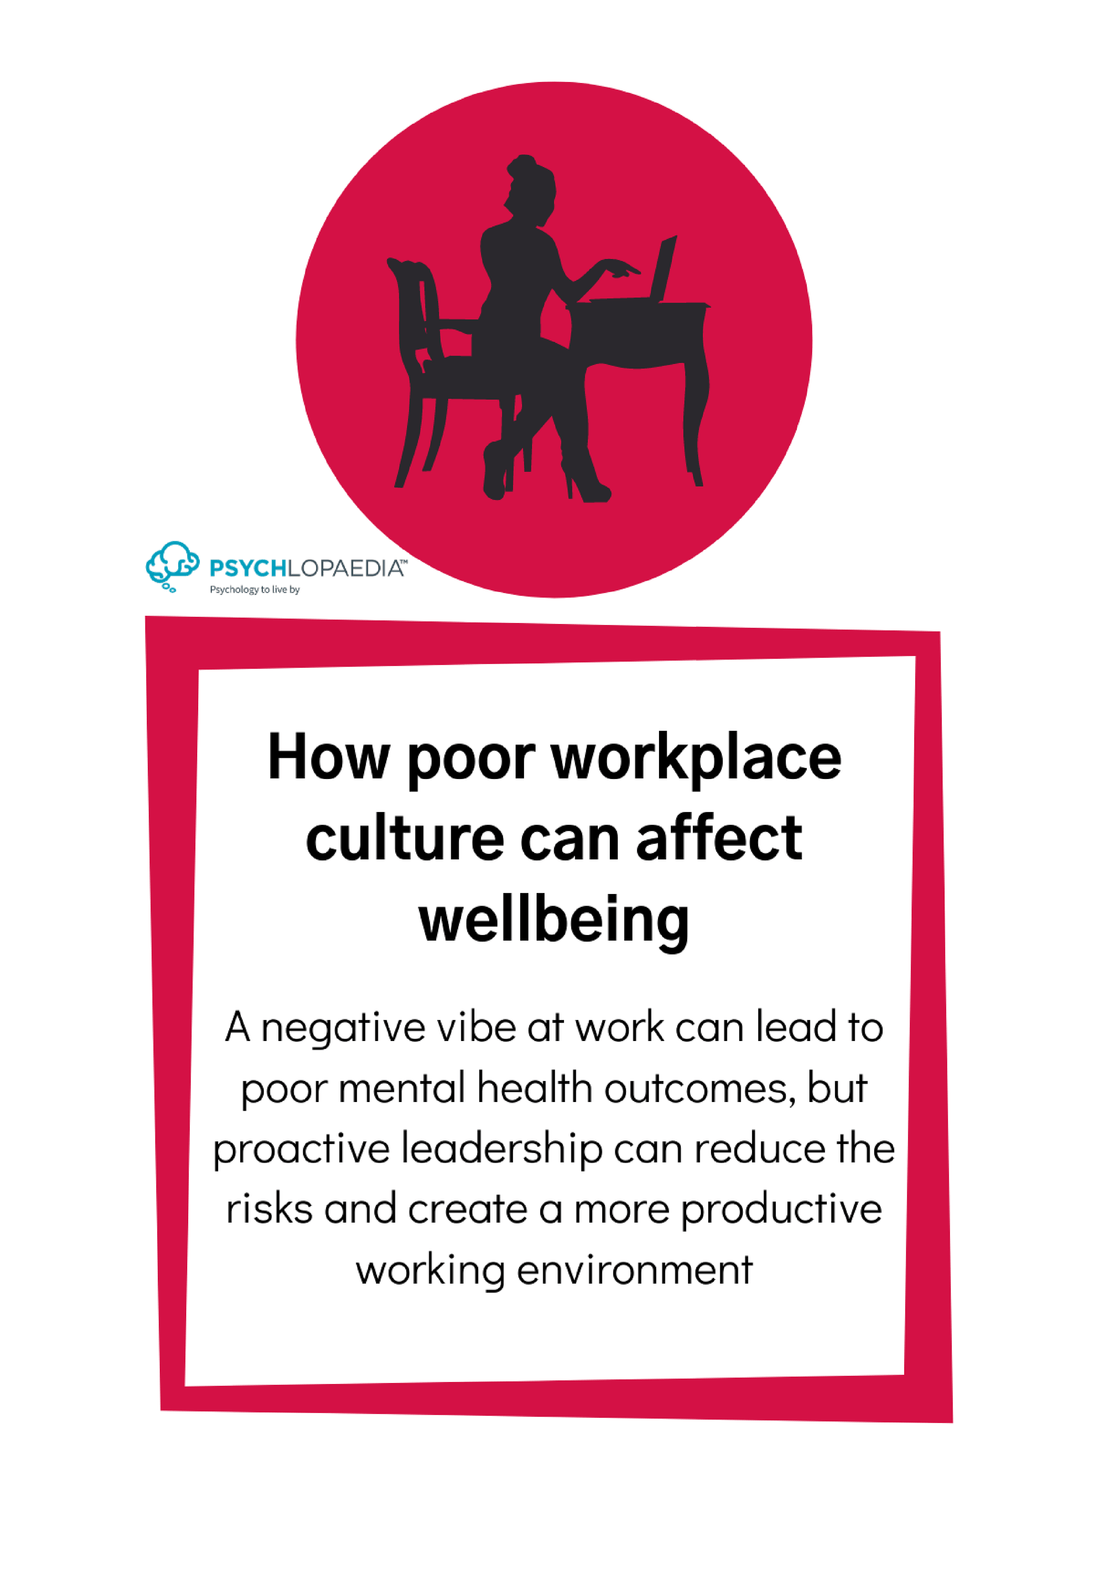 How poor workplace culture can affect wellbeing